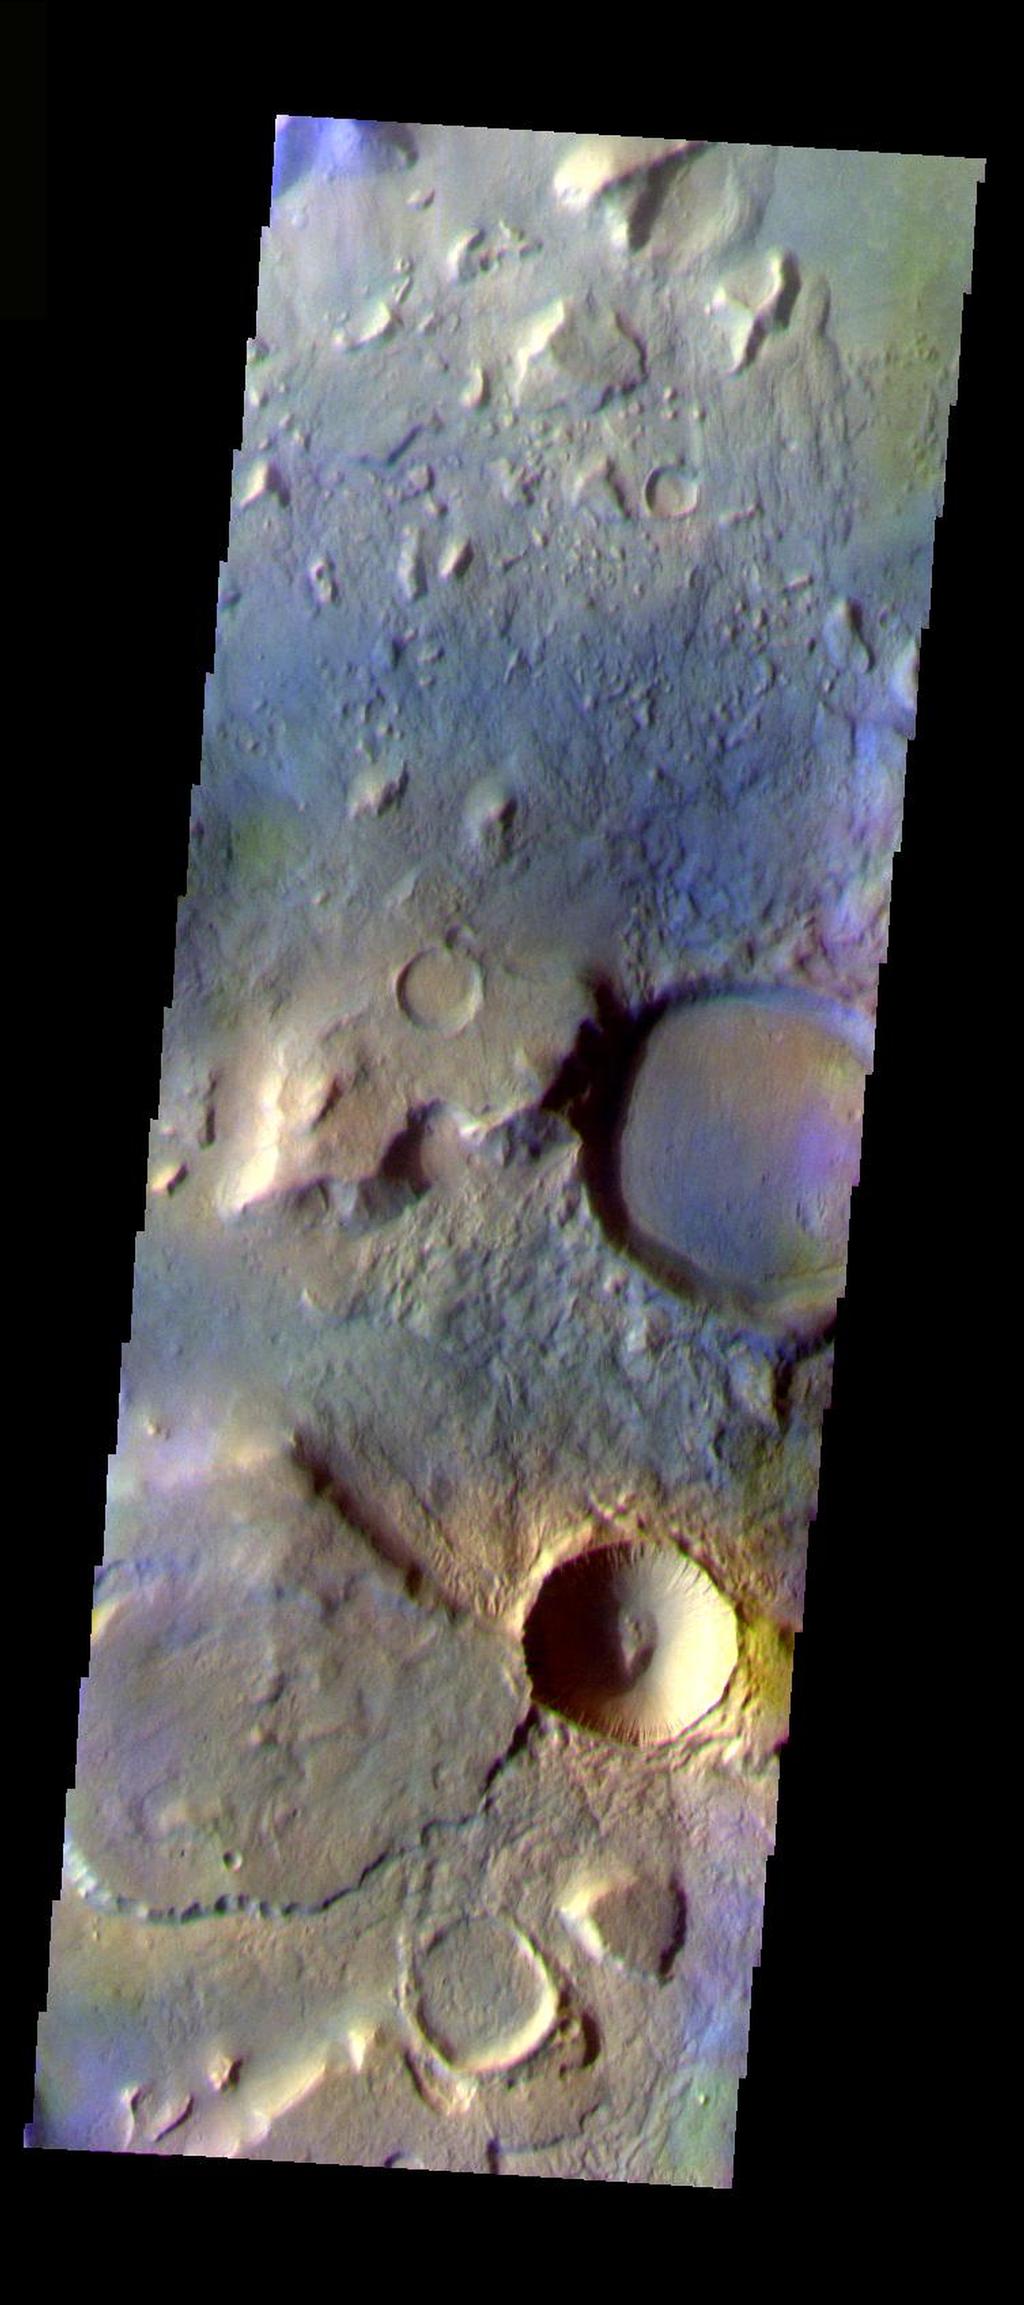 This false color image shows a region with craters of different ages located at the margin of Acidalia Planitia. This image was collected during the Northern Spring season. The THEMIS VIS camera is capable of capturing color images of the Martian surface using five different color filters. In this mode of operation, the spatial resolution and coverage of the image must be reduced to accommodate the additional data volume produced from using multiple filters. To make a color image, three of the five filter images (each in grayscale) are selected. Each is contrast enhanced and then converted to a red, green, or blue intensity image. These three images are then combined to produce a full color, single image. Because the THEMIS color filters don't span the full range of colors seen by the human eye, a color THEMIS image does not represent true color. Also, because each single-filter image is contrast enhanced before inclusion in the three-color image, the apparent color variation of the scene is exaggerated. Nevertheless, the color variation that does appear is representative of some change in color, however subtle, in the actual scene. Note that the long edges of THEMIS color images typically contain color artifacts that do not represent surface variation.